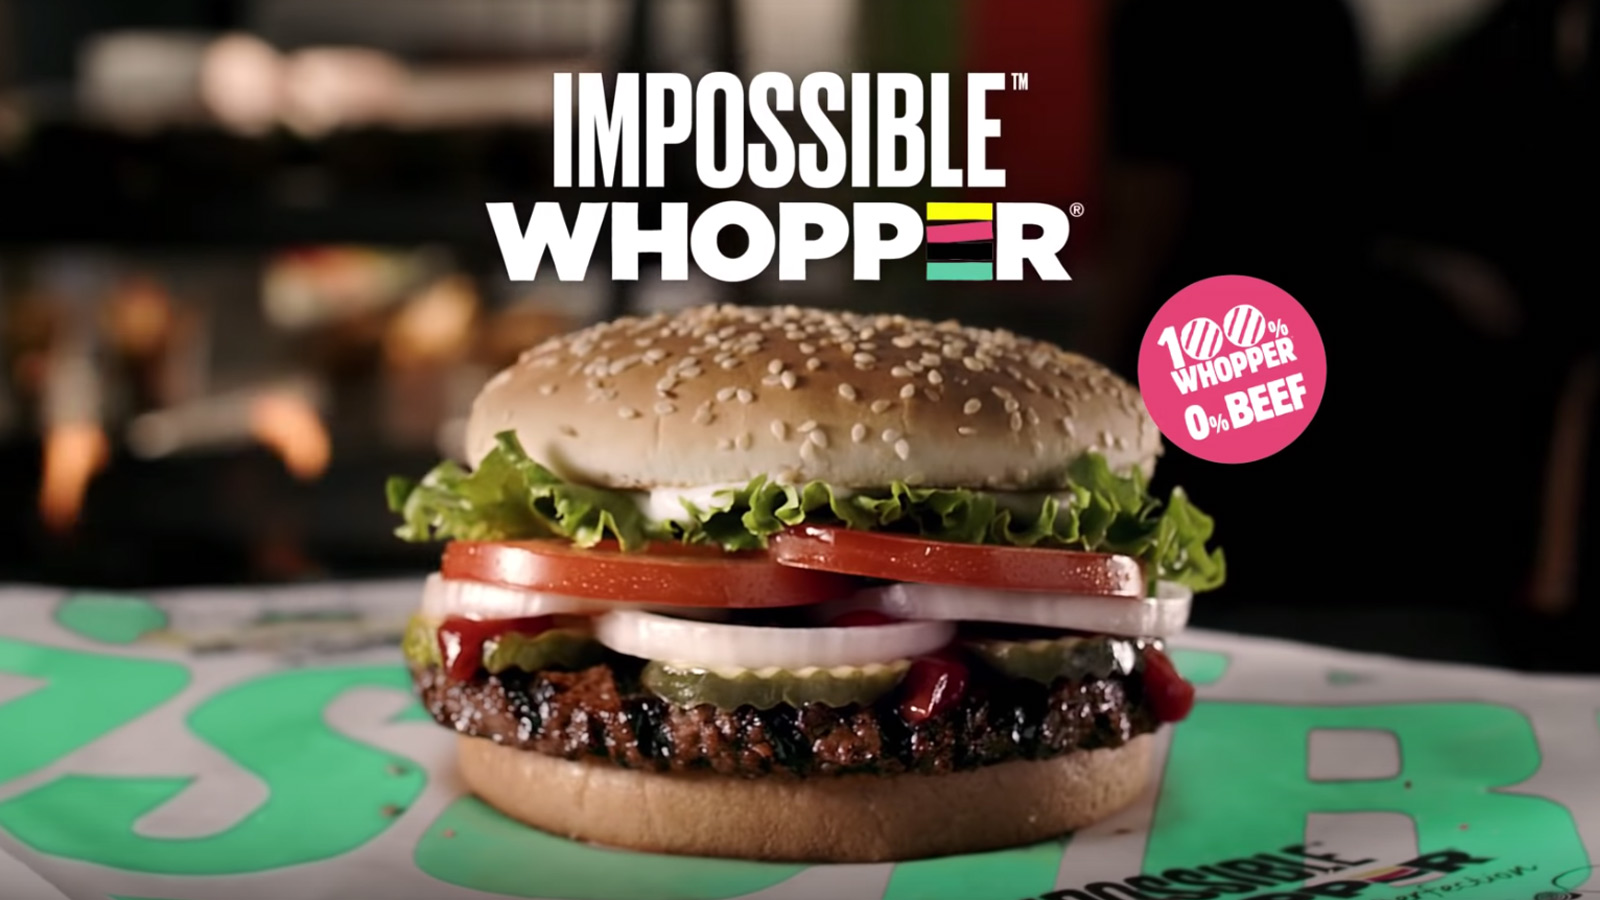 Imossible Whopper